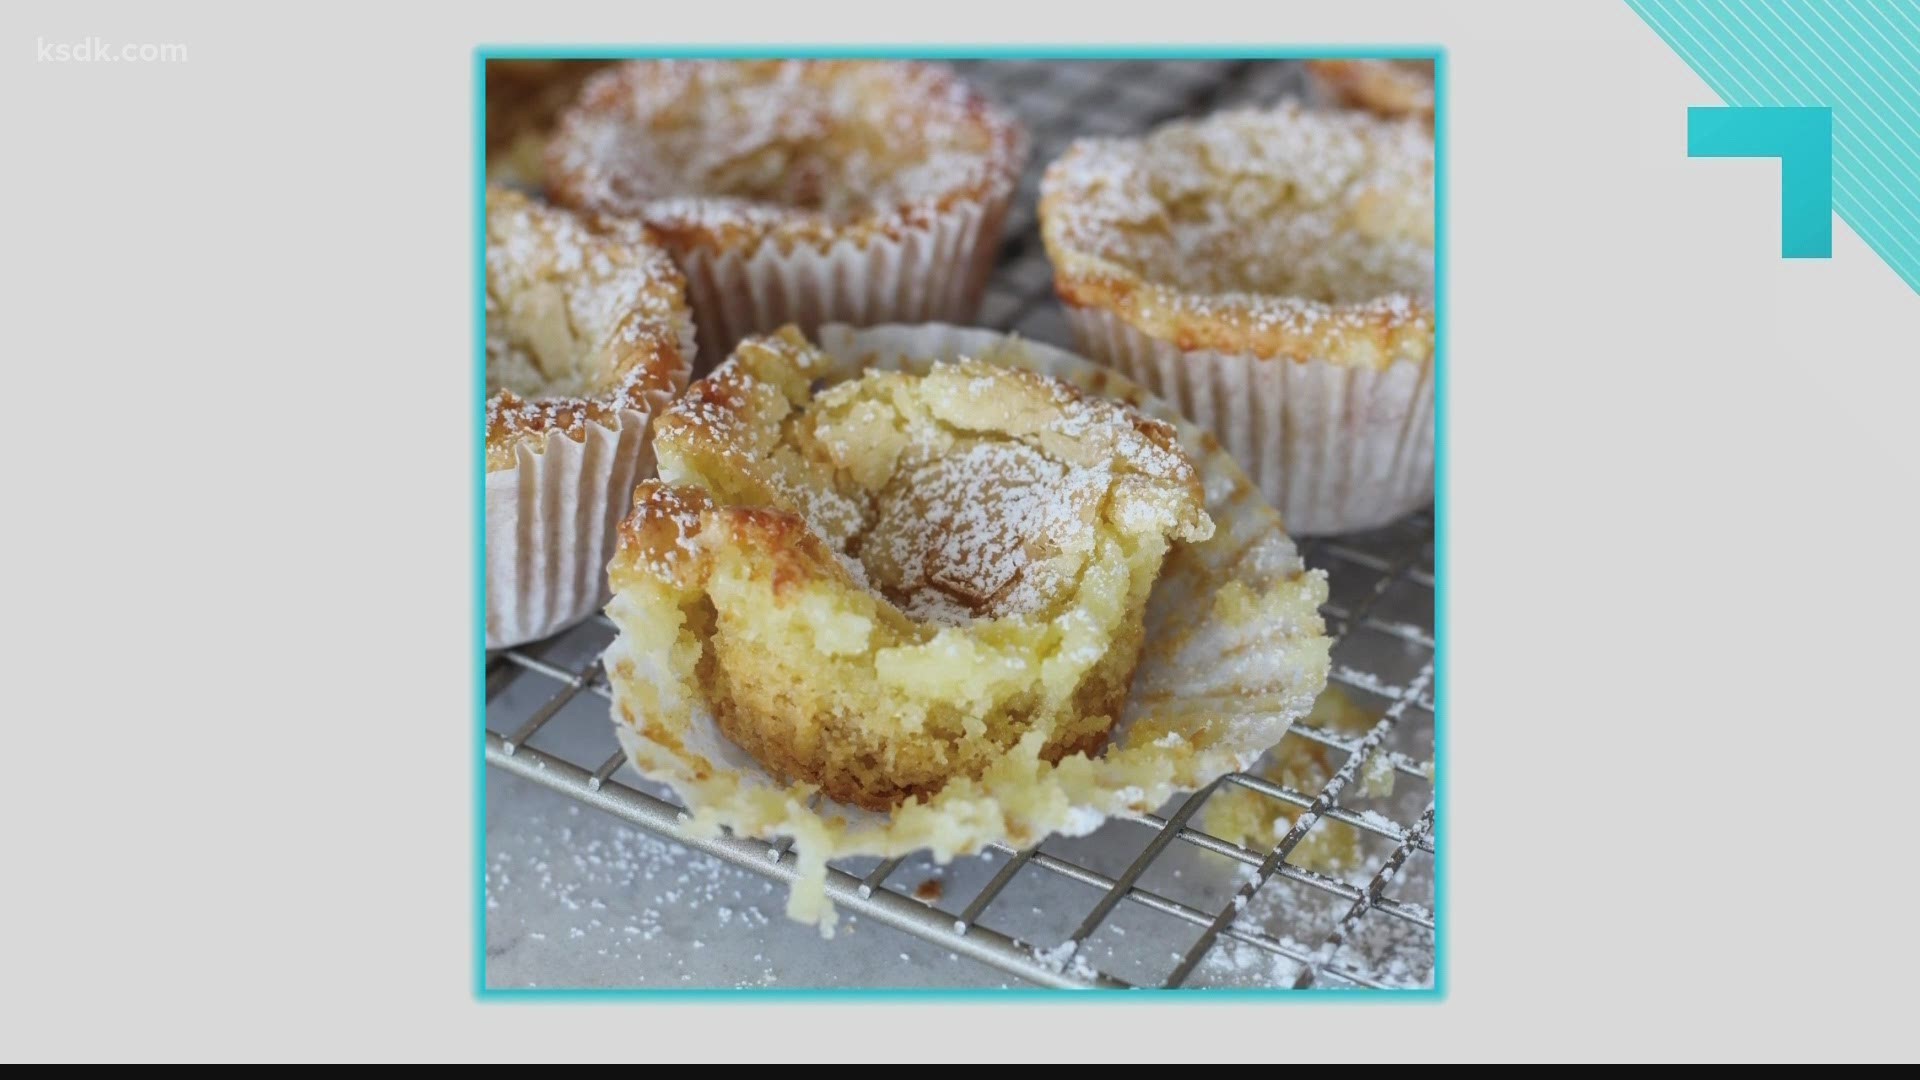 Sarita Gelner of Ritzy Mom Blog shares a recipe for Gooey Butter Cupcakes.